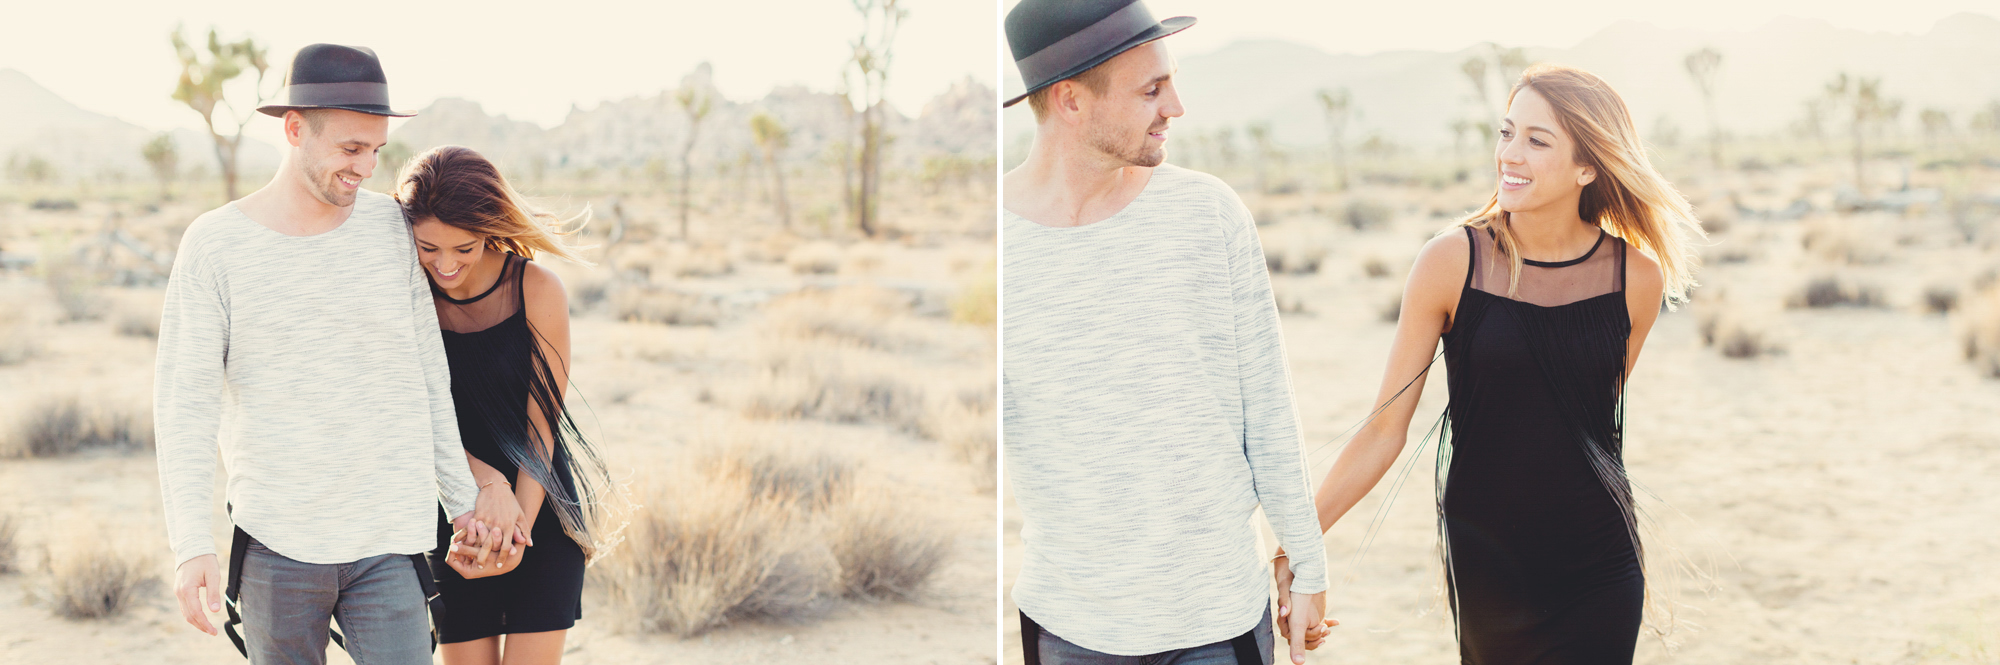 Joshua Tree Engagement Session @Anne-Claire Brun -11